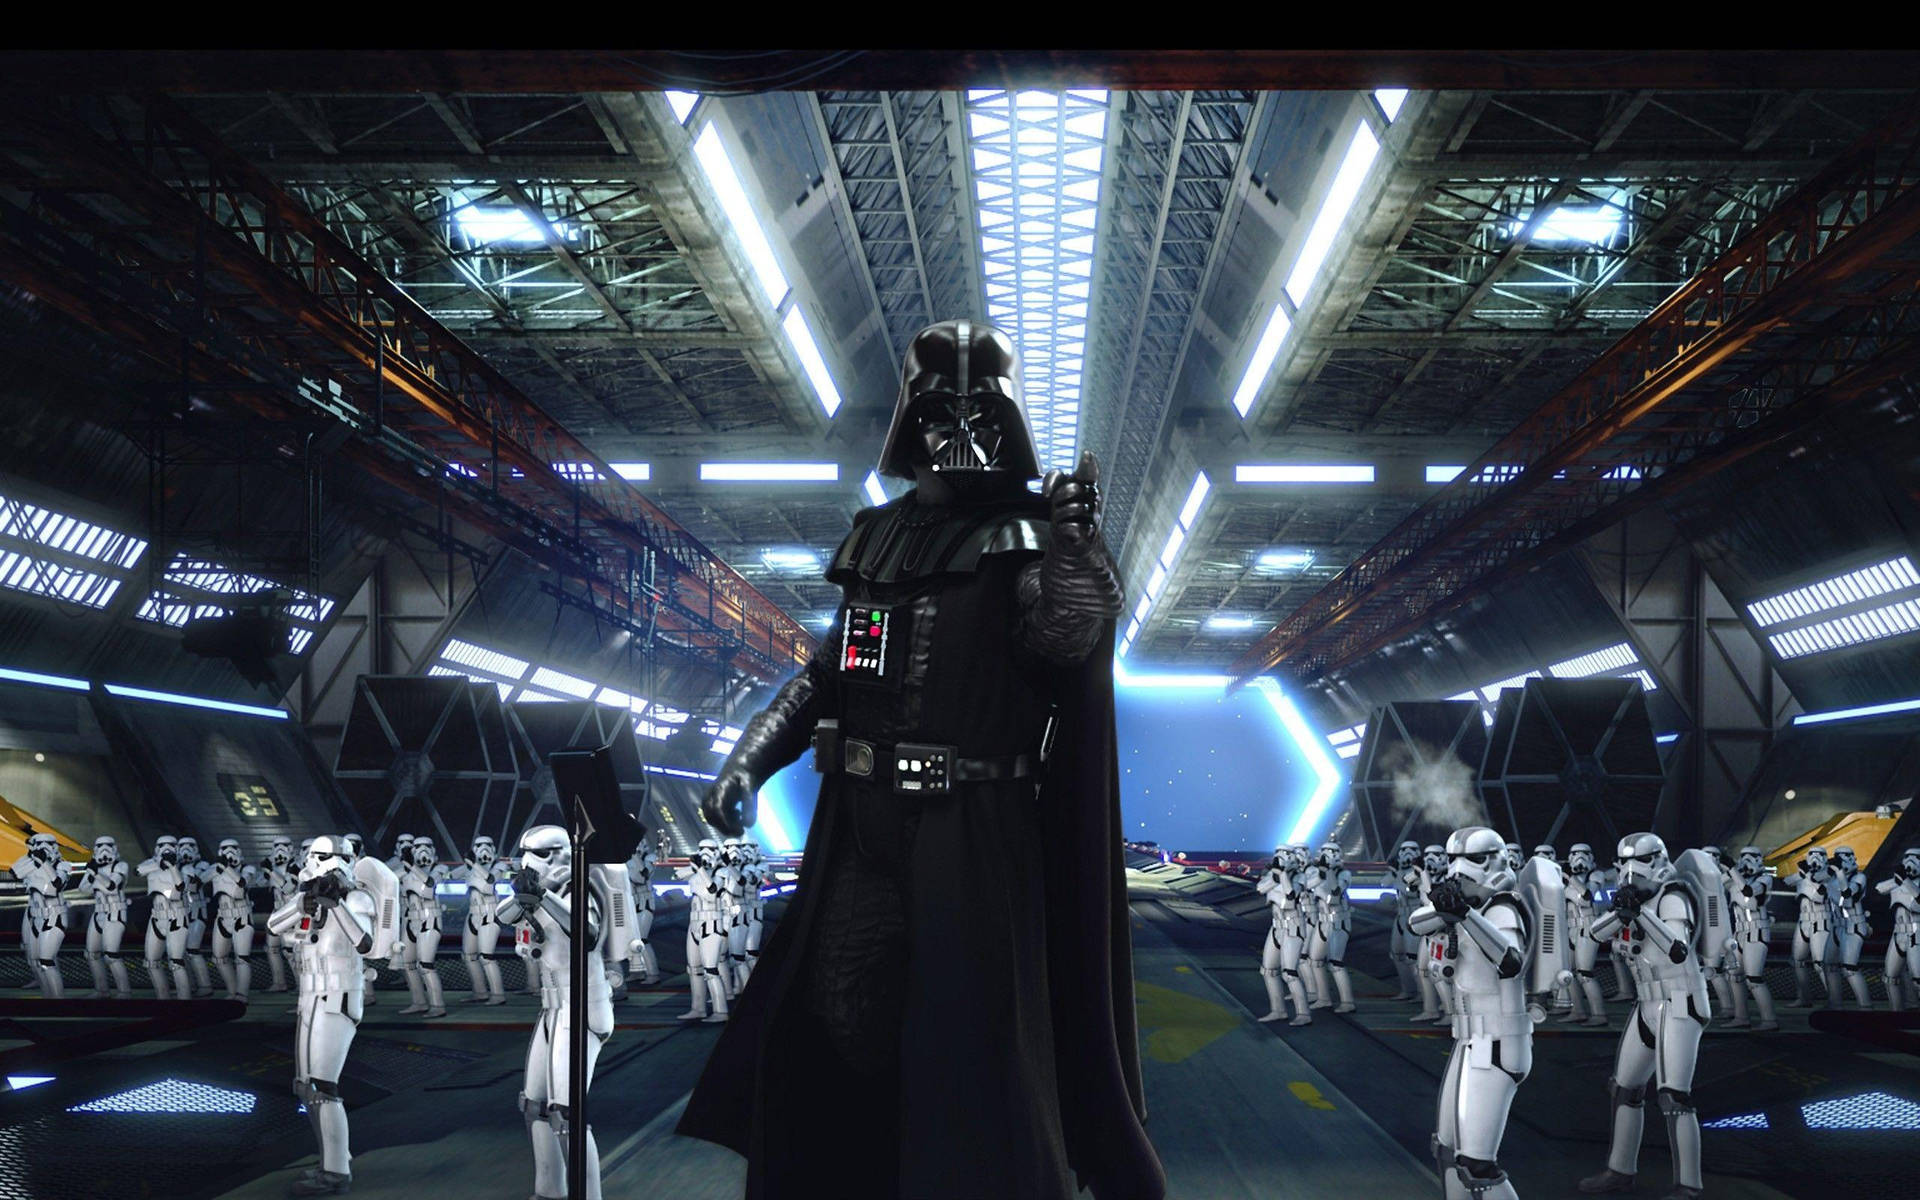 Darth Vader 2560X1600 Wallpaper and Background Image